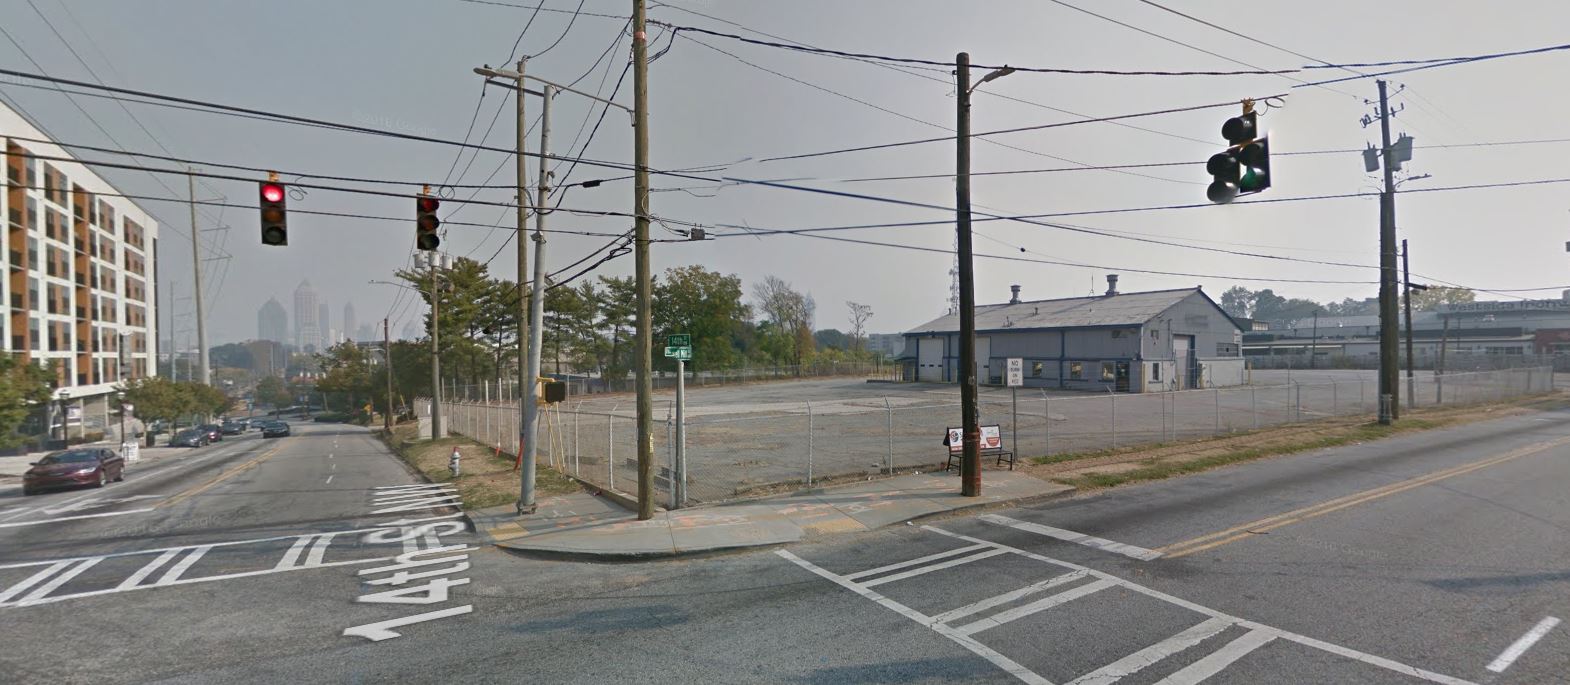 The vacant site which used to house United Tool Rental offers views of the Midtown skyline down 14th Street.